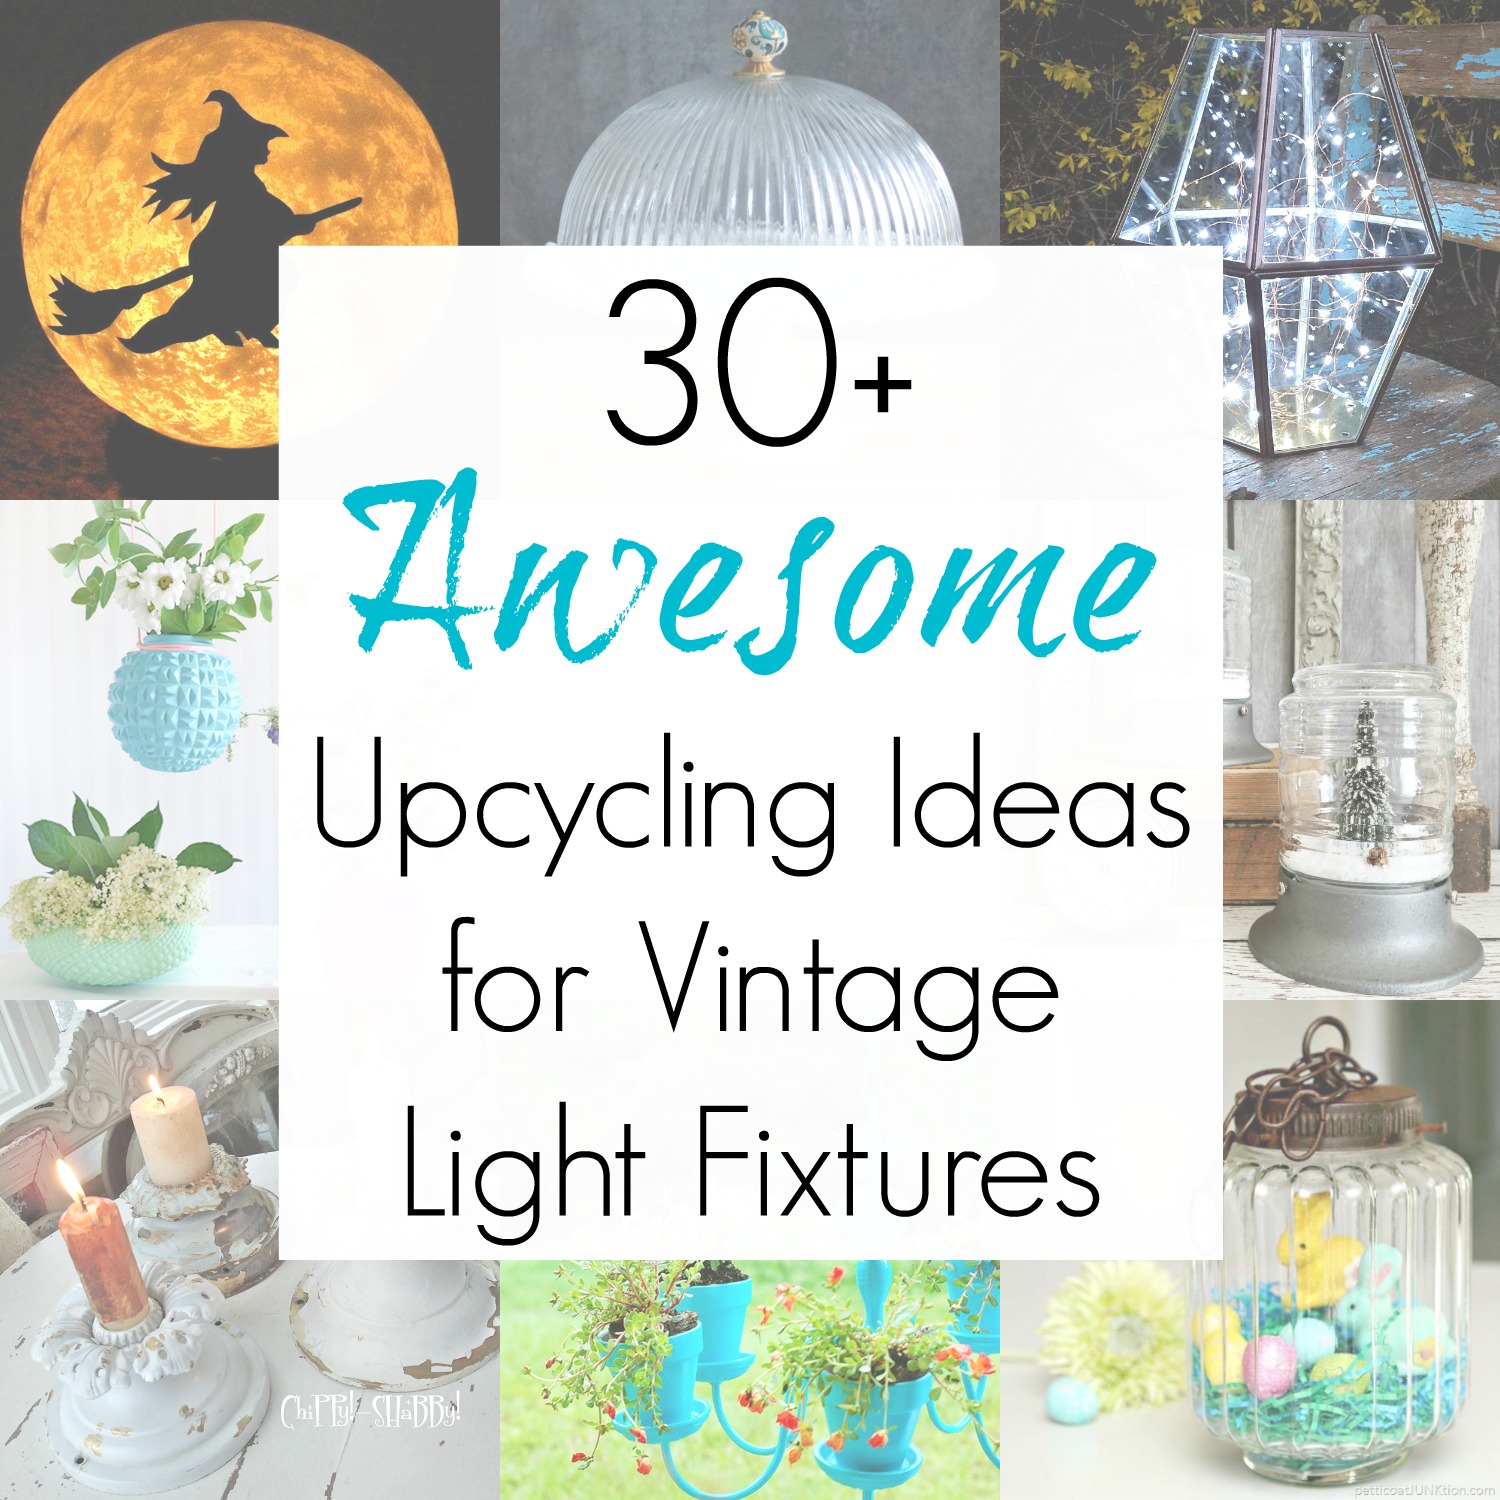 Upcycling ideas and repurposed projects for vintage light fixtures, glass globes, ceiling fan light covers, and hanging lights compiled by Sadie Seasongoods